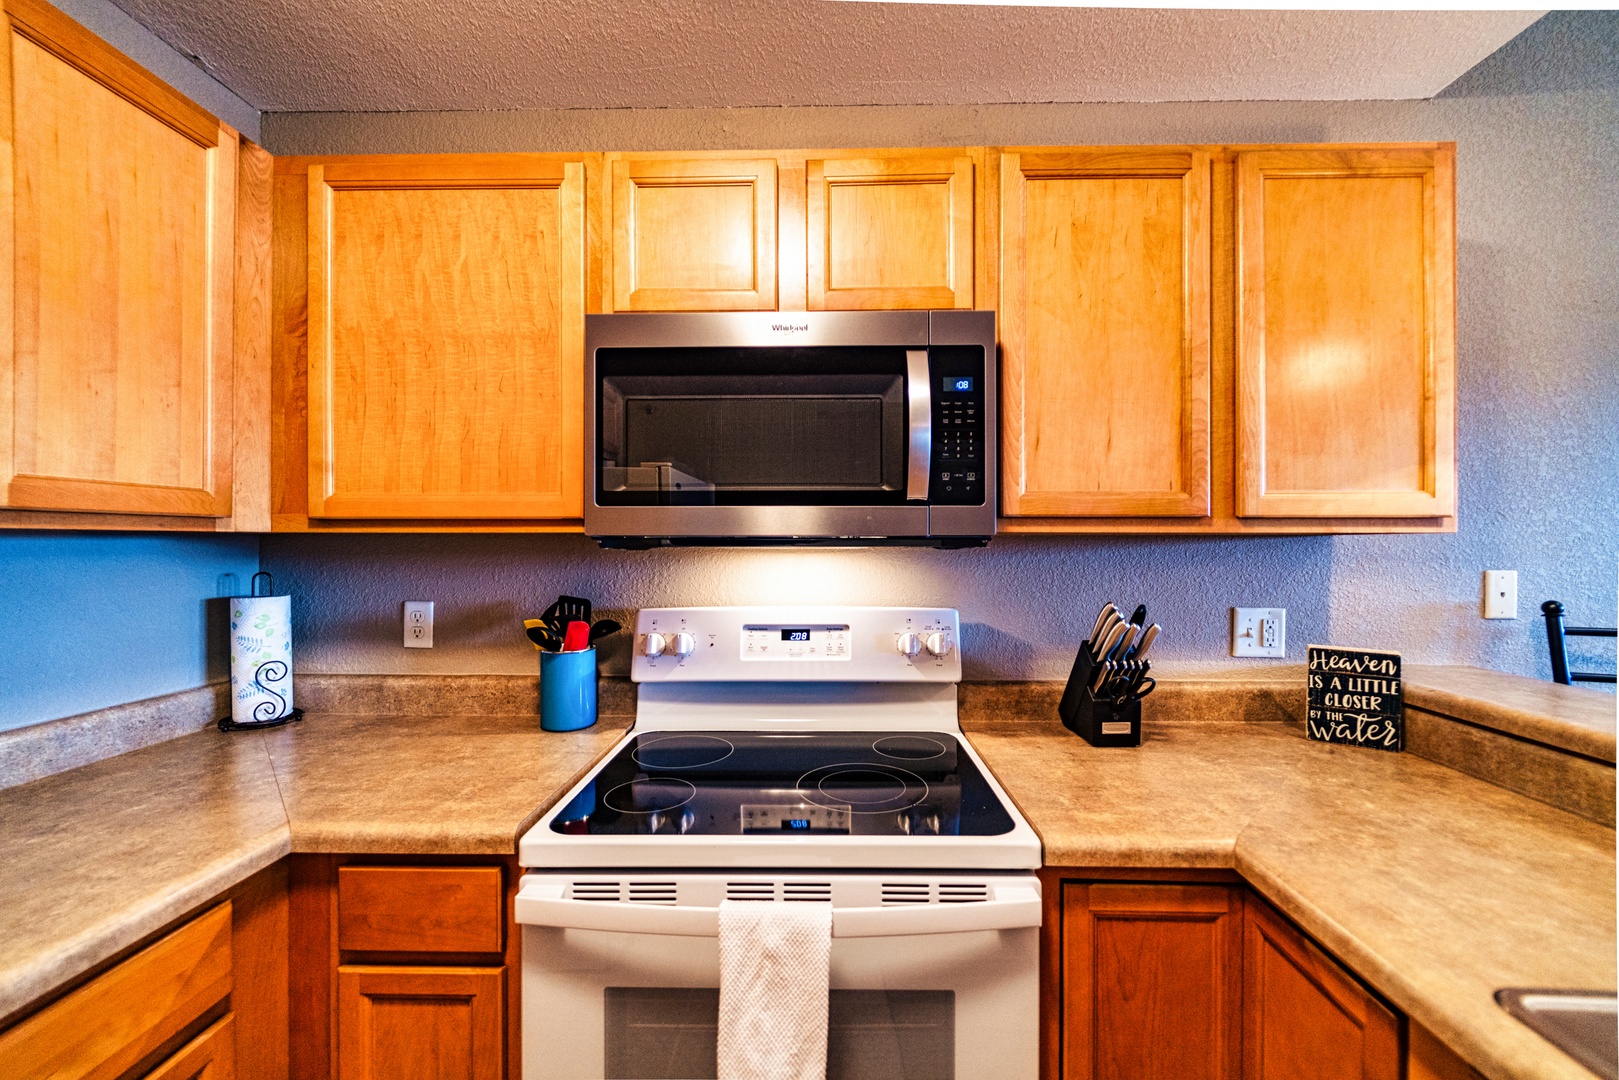 This quaint kitchen offers ample space & all the comforts of home